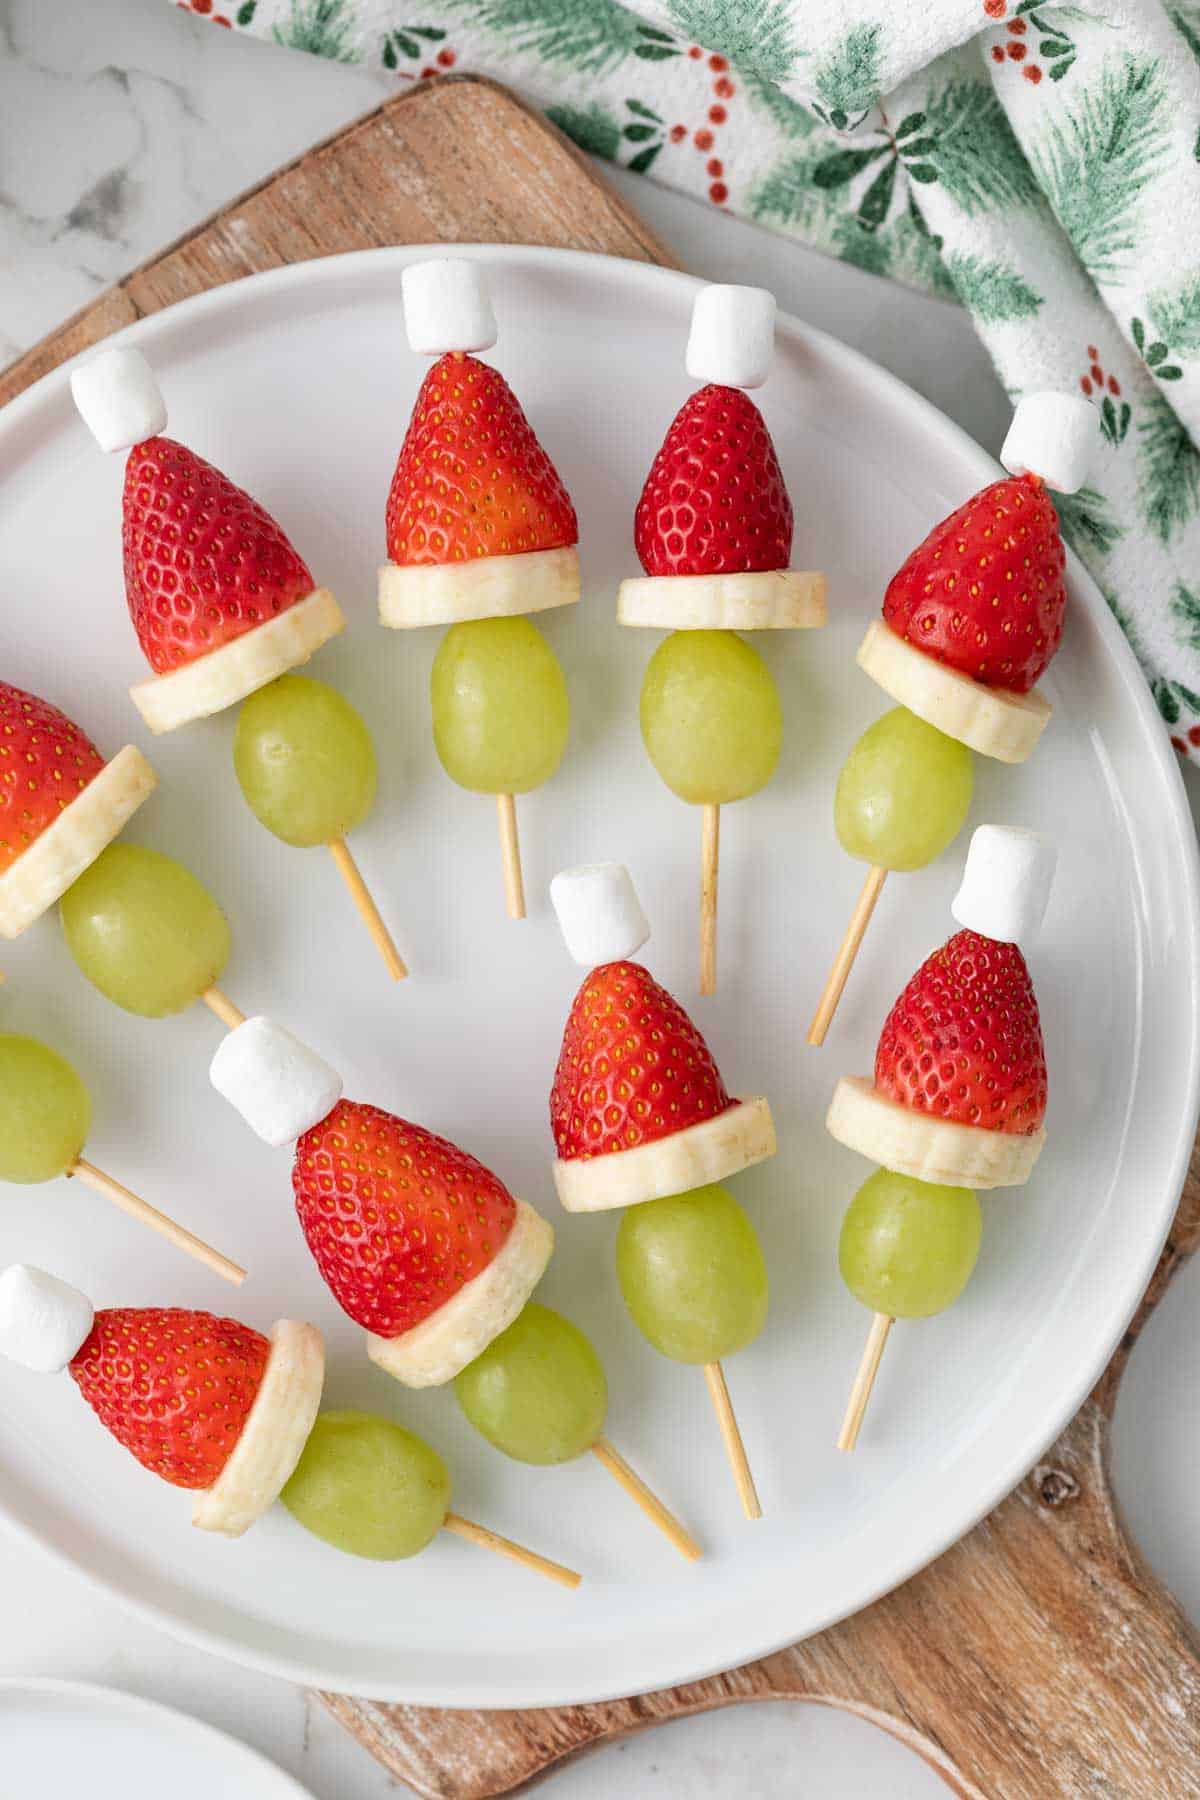 Grinch kabobs with strawberries, grapes, banana slices, and marshmallows on a skewer on a white plate.